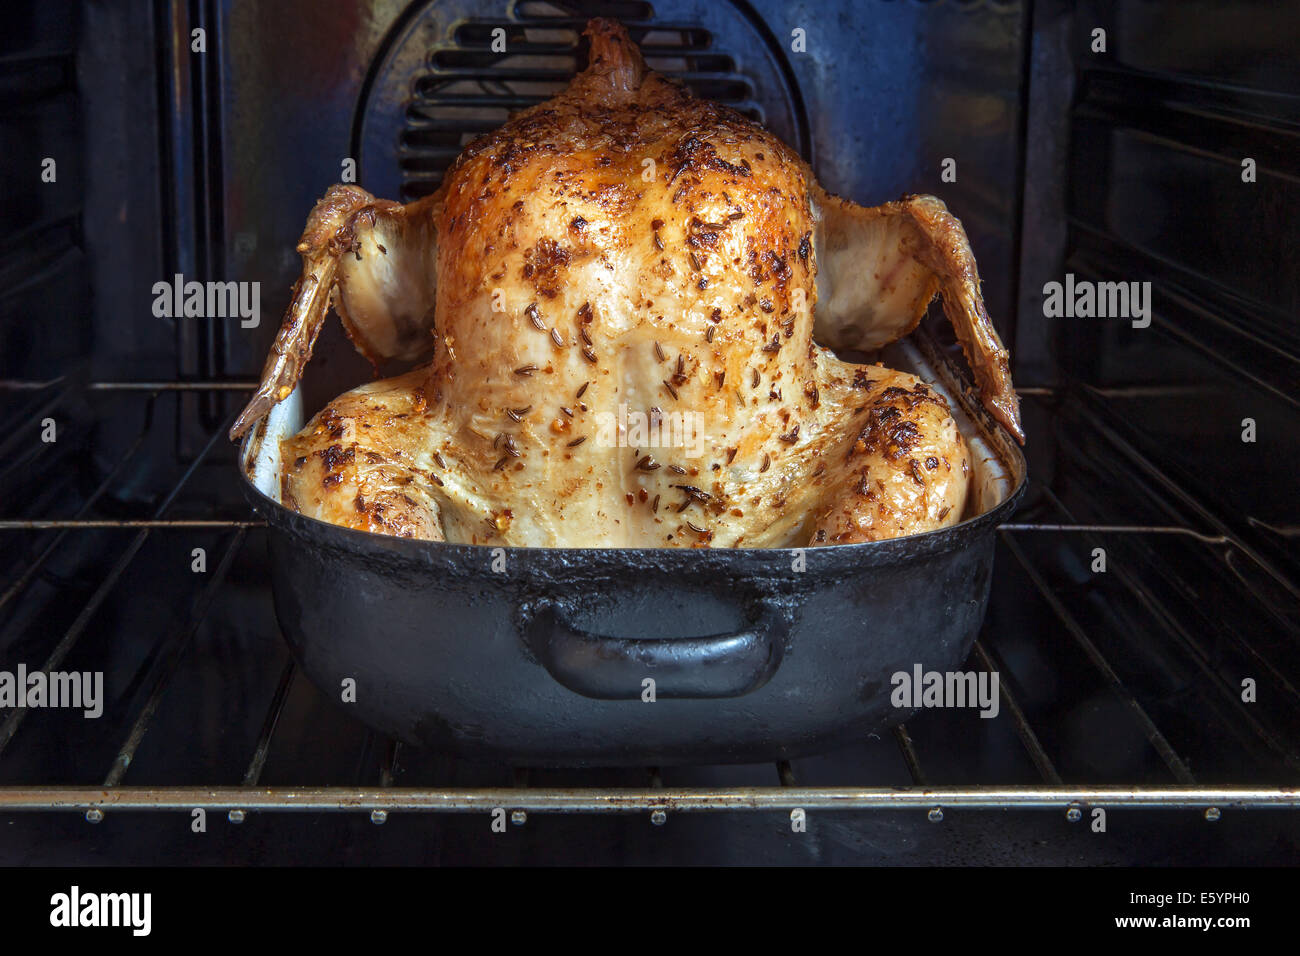 https://c8.alamy.com/comp/E5YPH0/baked-chicken-in-a-roasting-pan-in-oven-E5YPH0.jpg